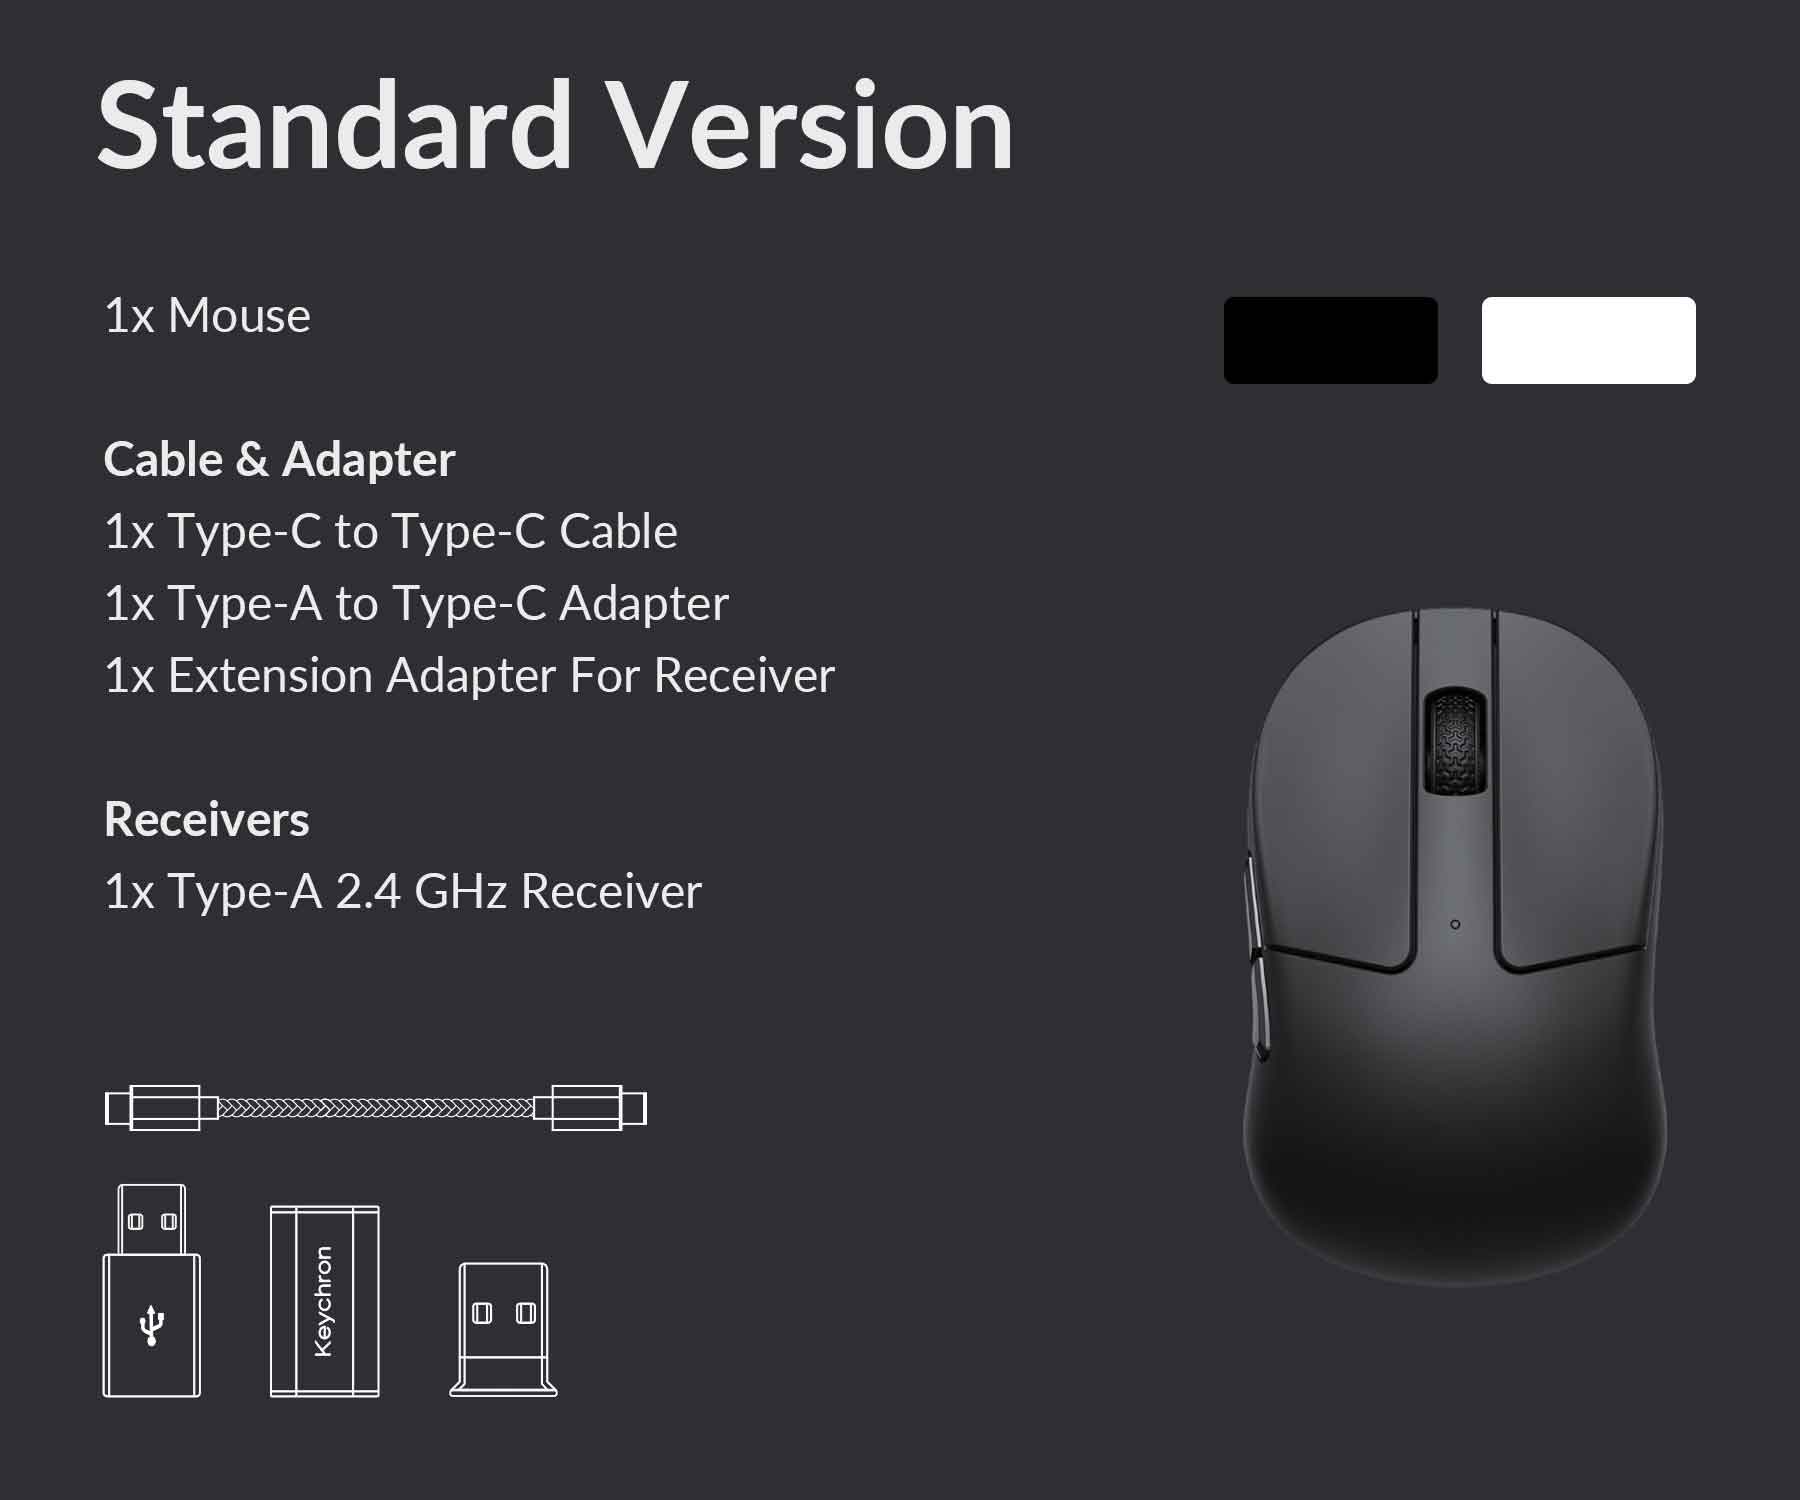 package-list-of-the-keychron-m4-wireless-mouse-standard-version__PID:220710fc-54b2-4893-823c-7e1fedb340fa